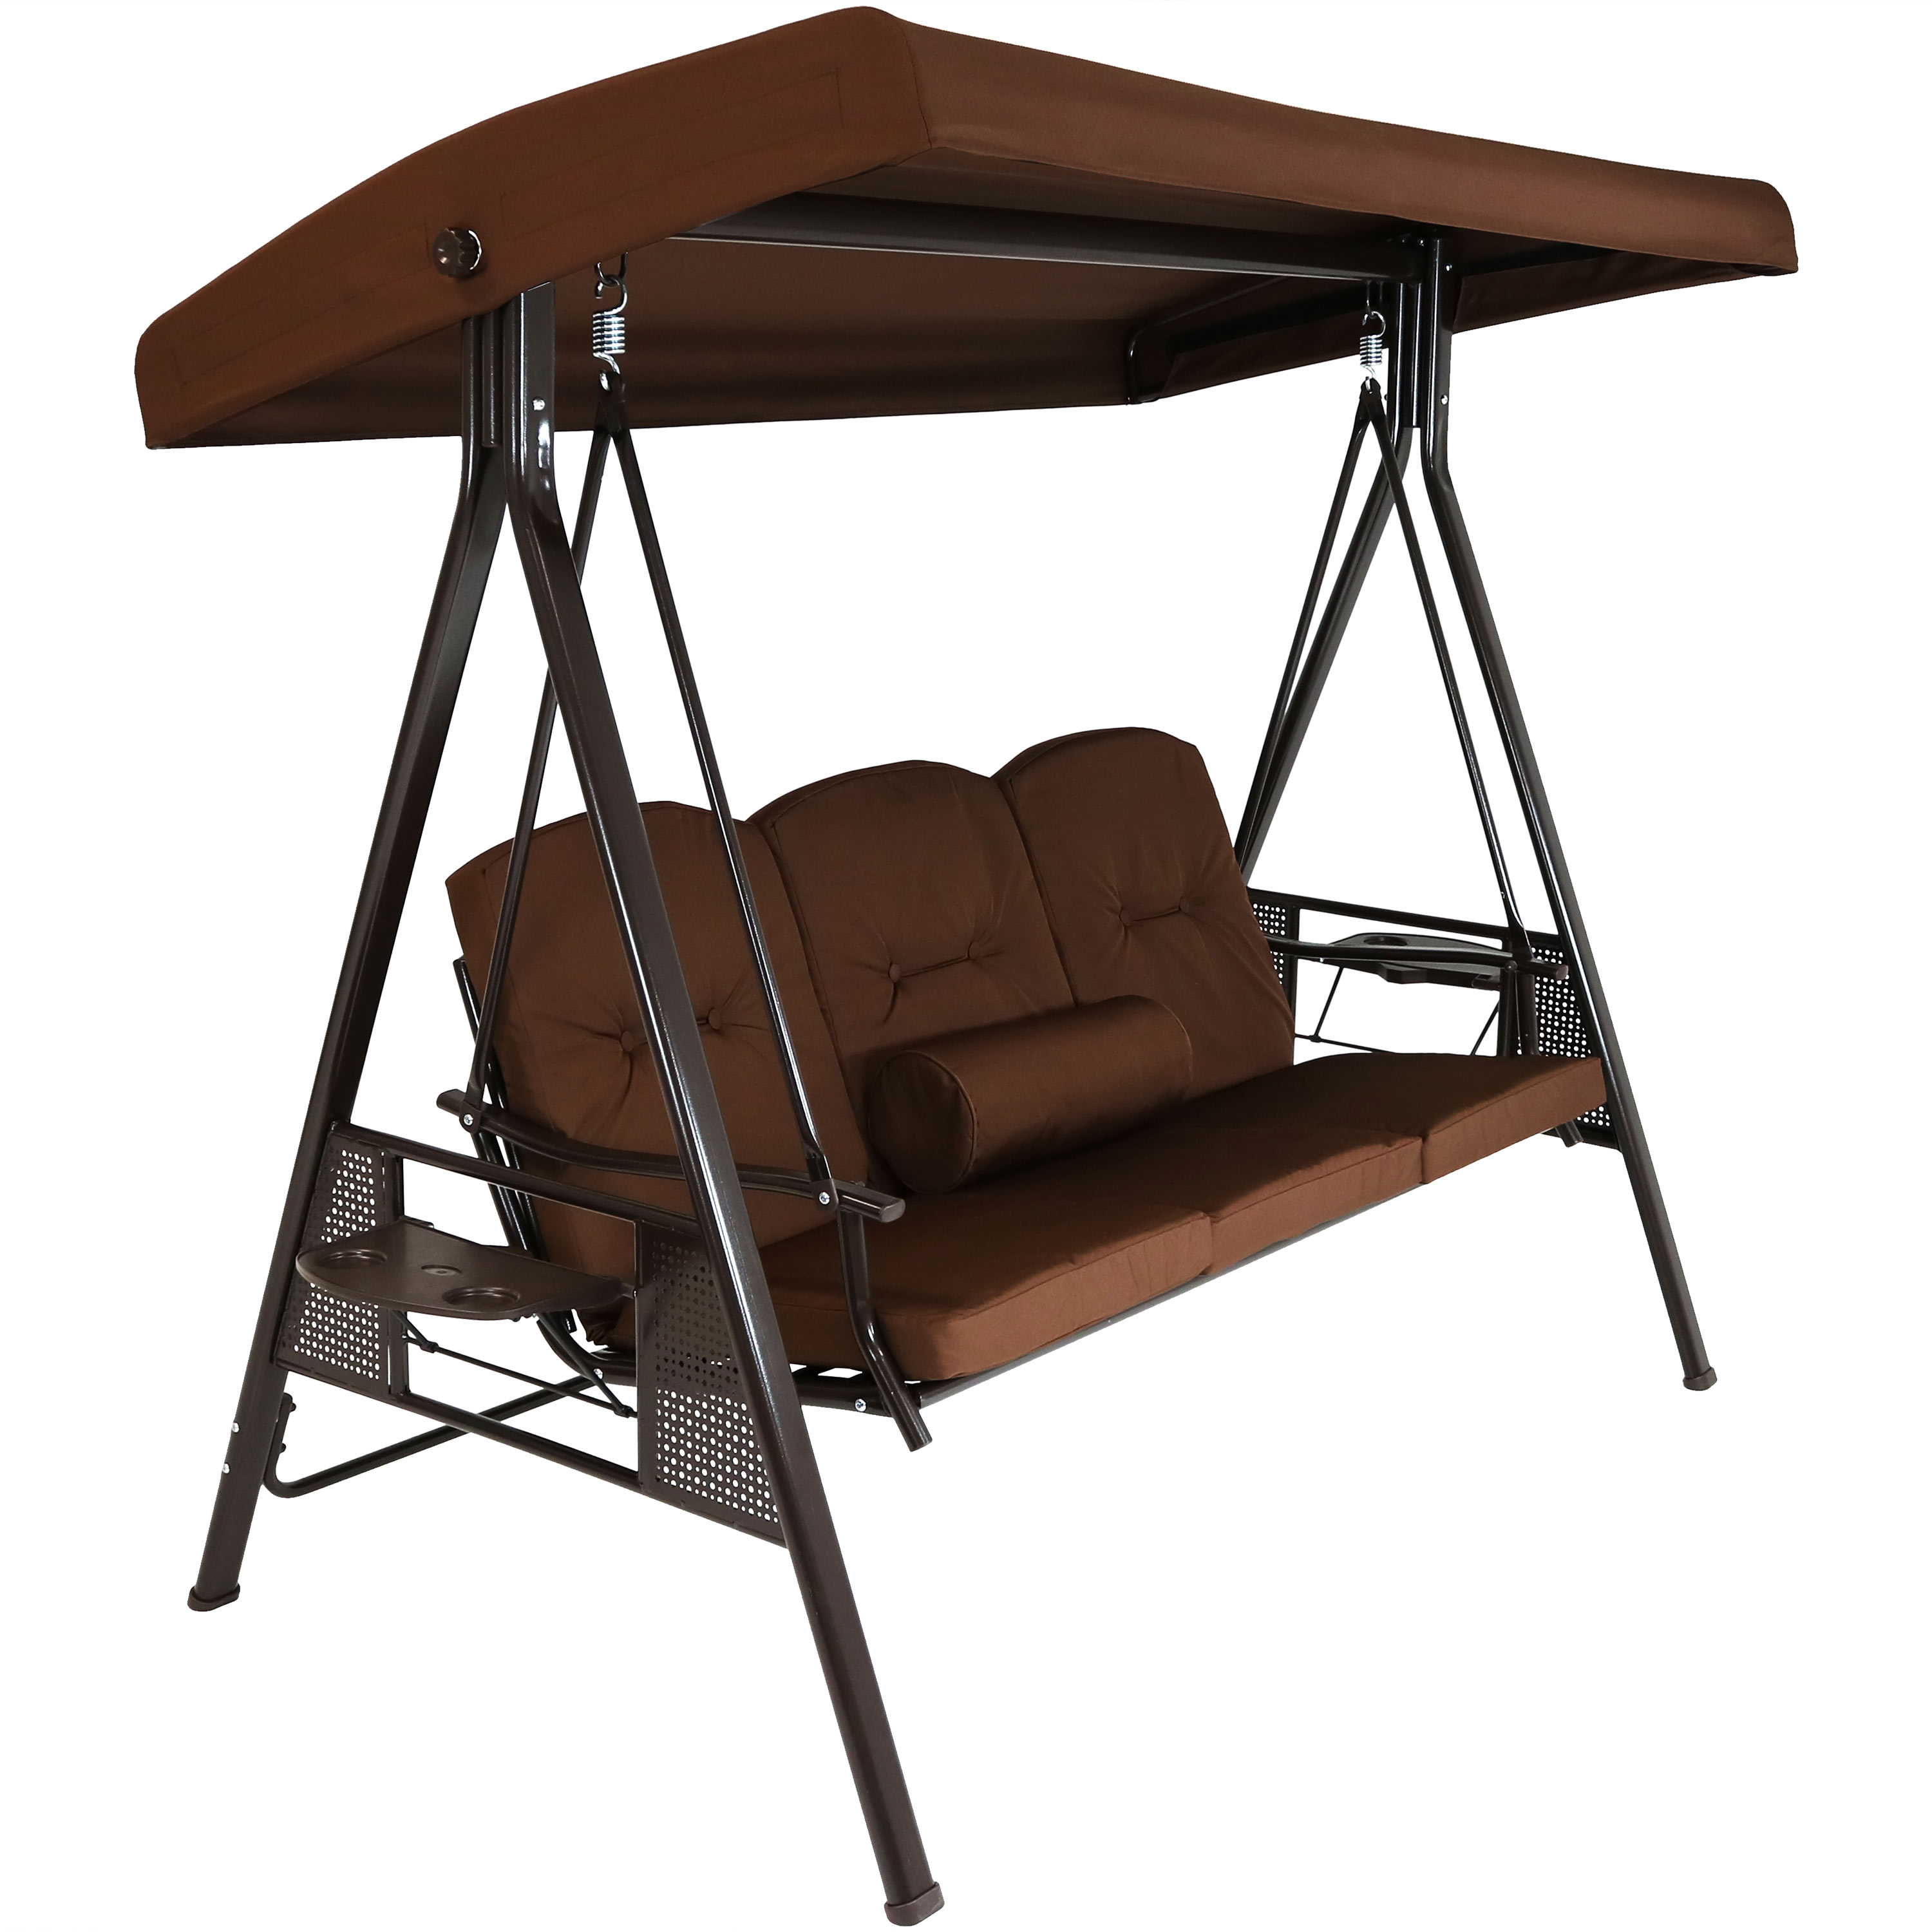 Sunnydaze 3-Person Steel Frame Outdoor Adjustable Tilt Canopy Patio Swing with Side Tables, Cushions and Pillow, Brown